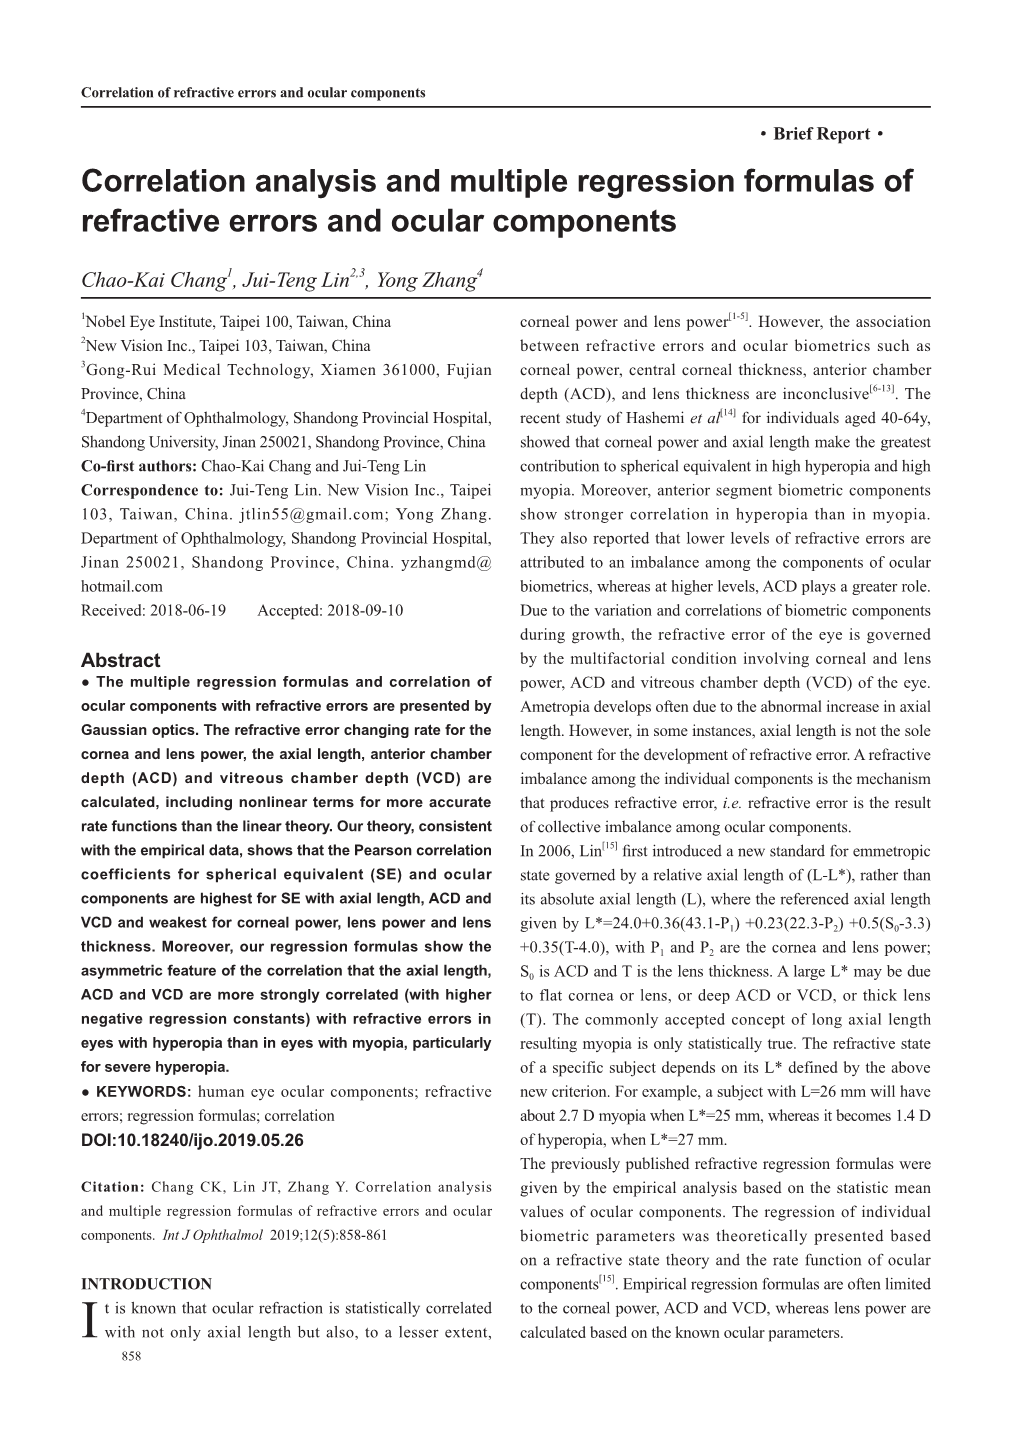 Correlation Analysis and Multiple Regression Formulas of Refractive Errors and Ocular Components